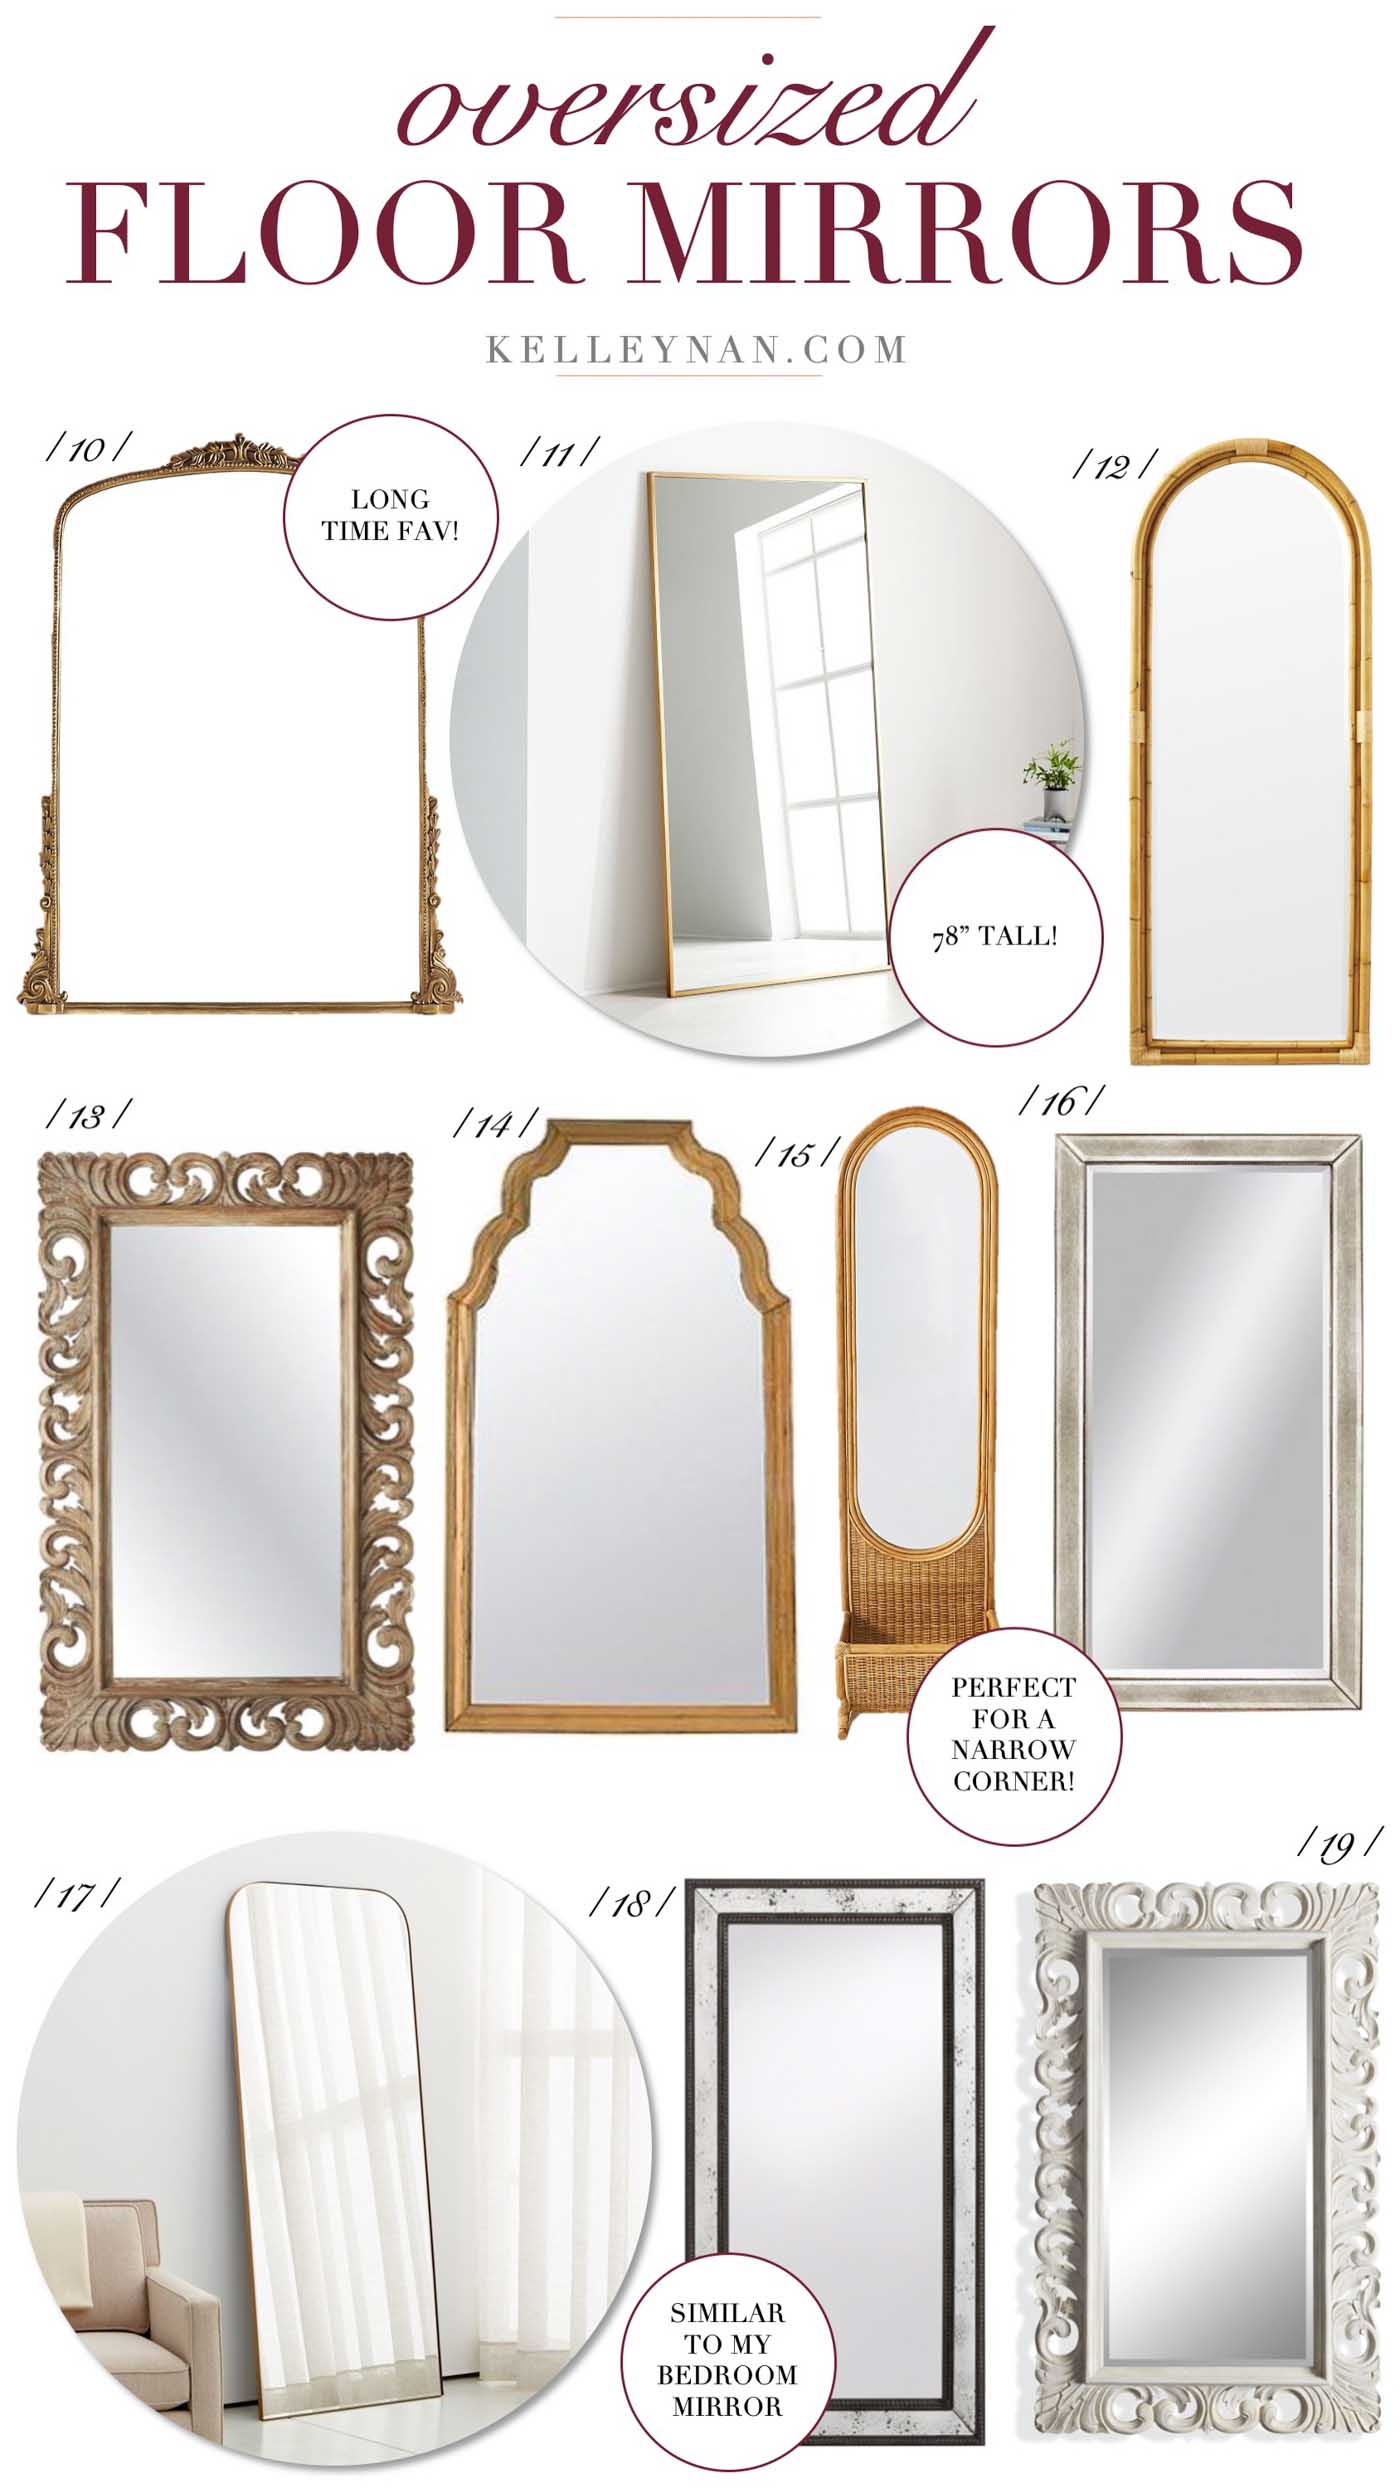 Oversized, Large Floor Mirrors for Most Budgets!